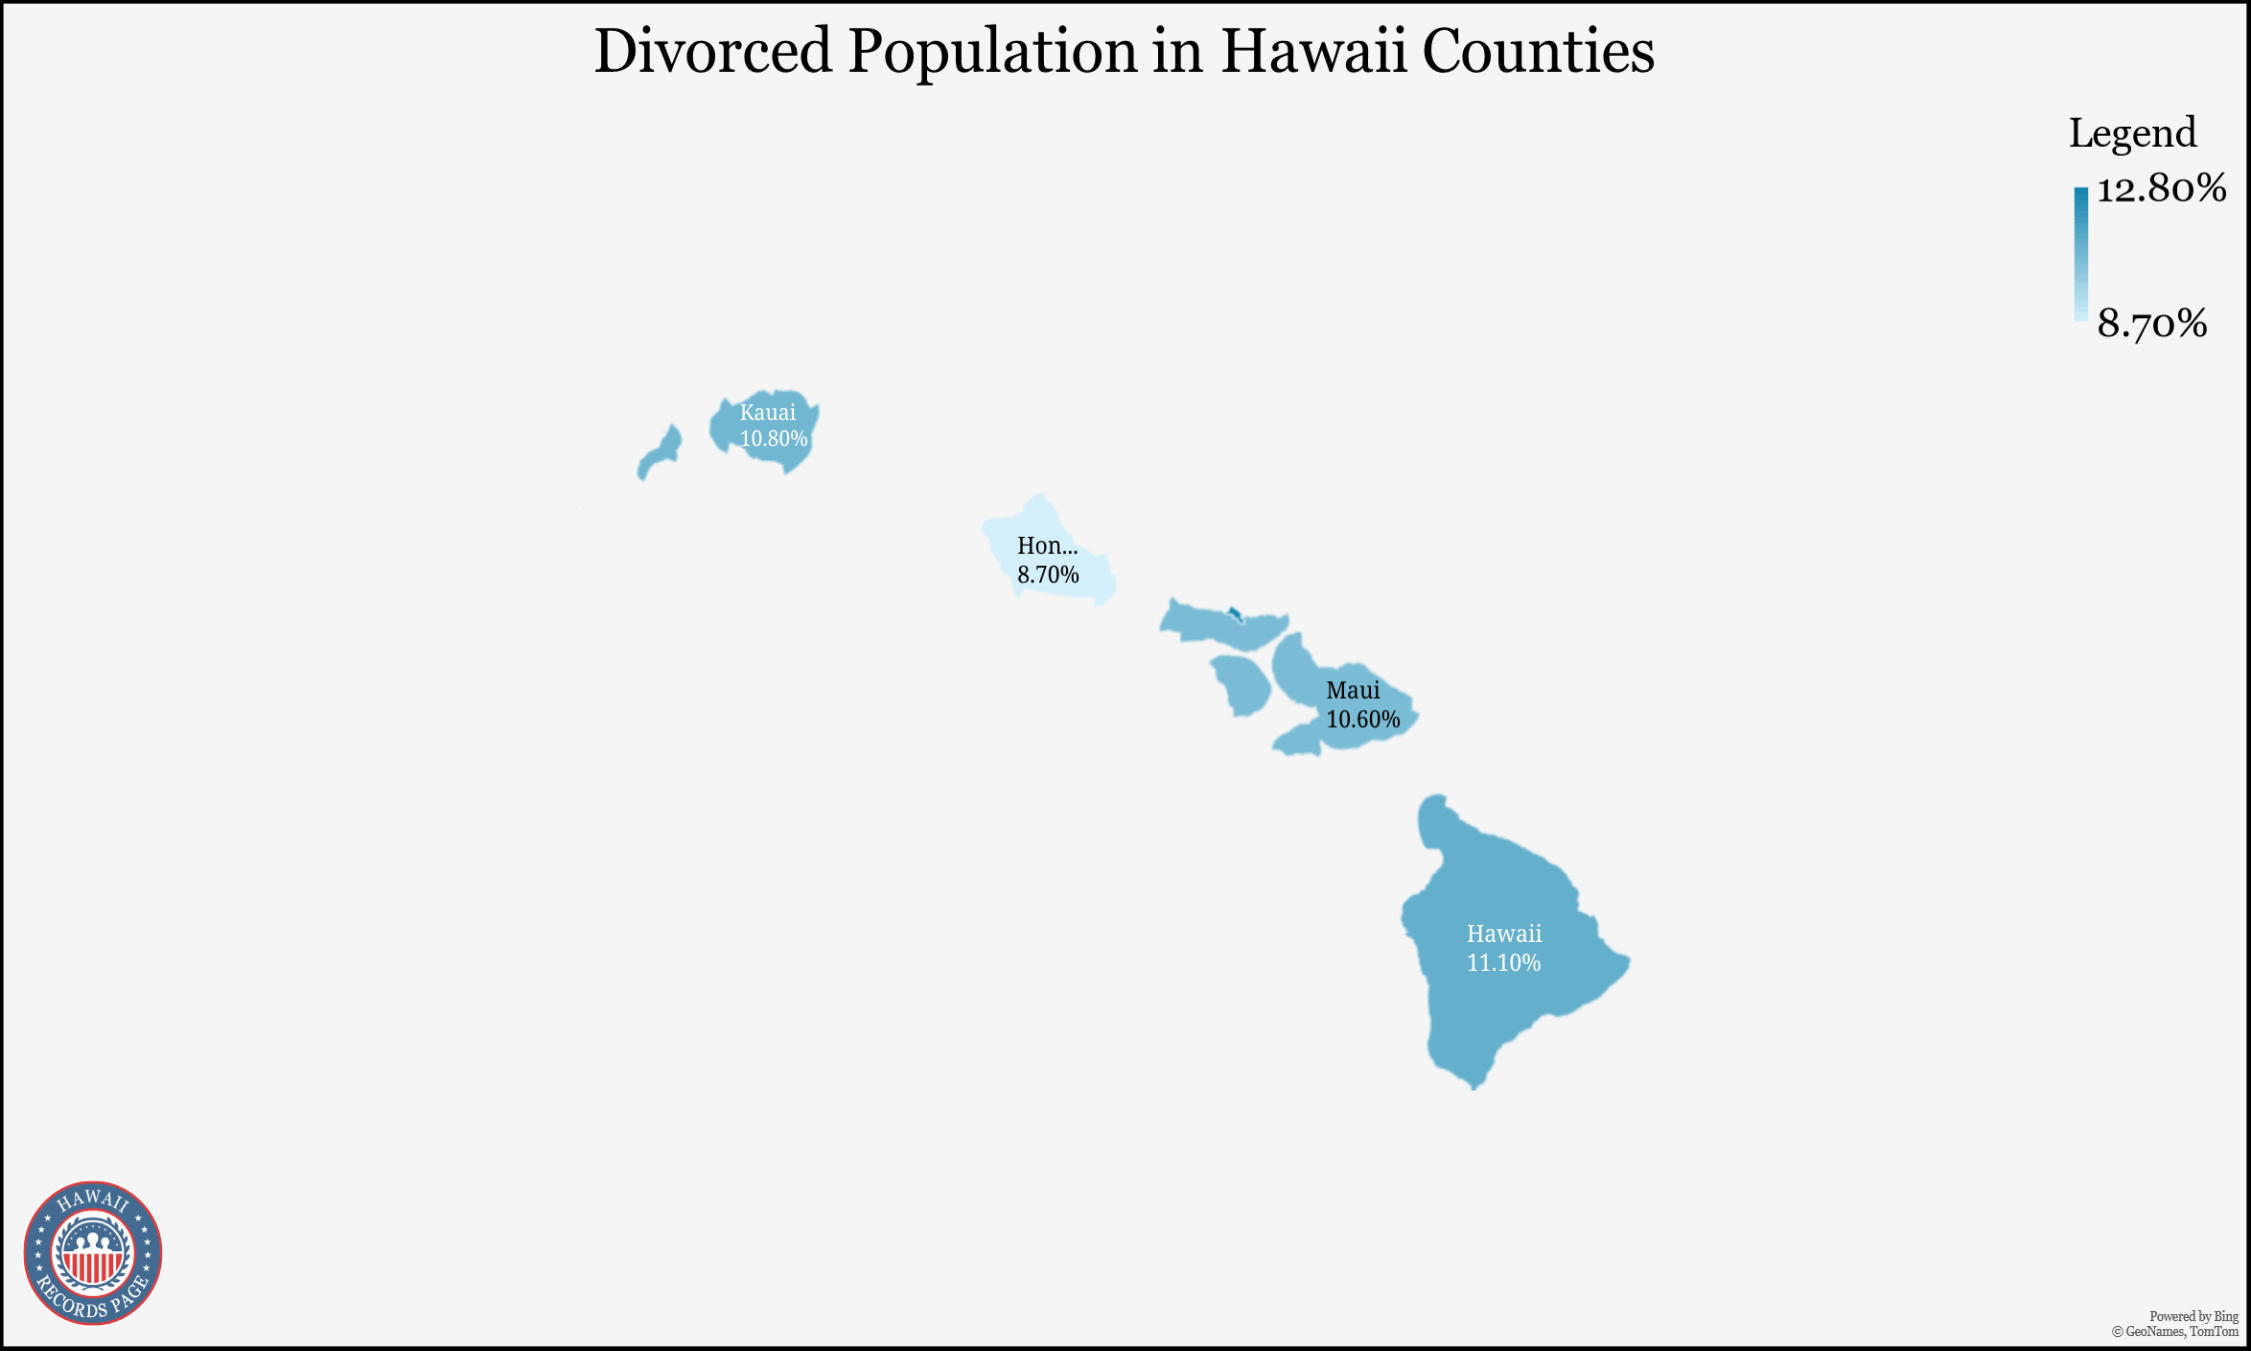 A chart/map shows the divorced population in each county of Hawaii, with a legend located at the top right corner indicating that the highest percentage is 12.80% and the lowest is 8.70%.